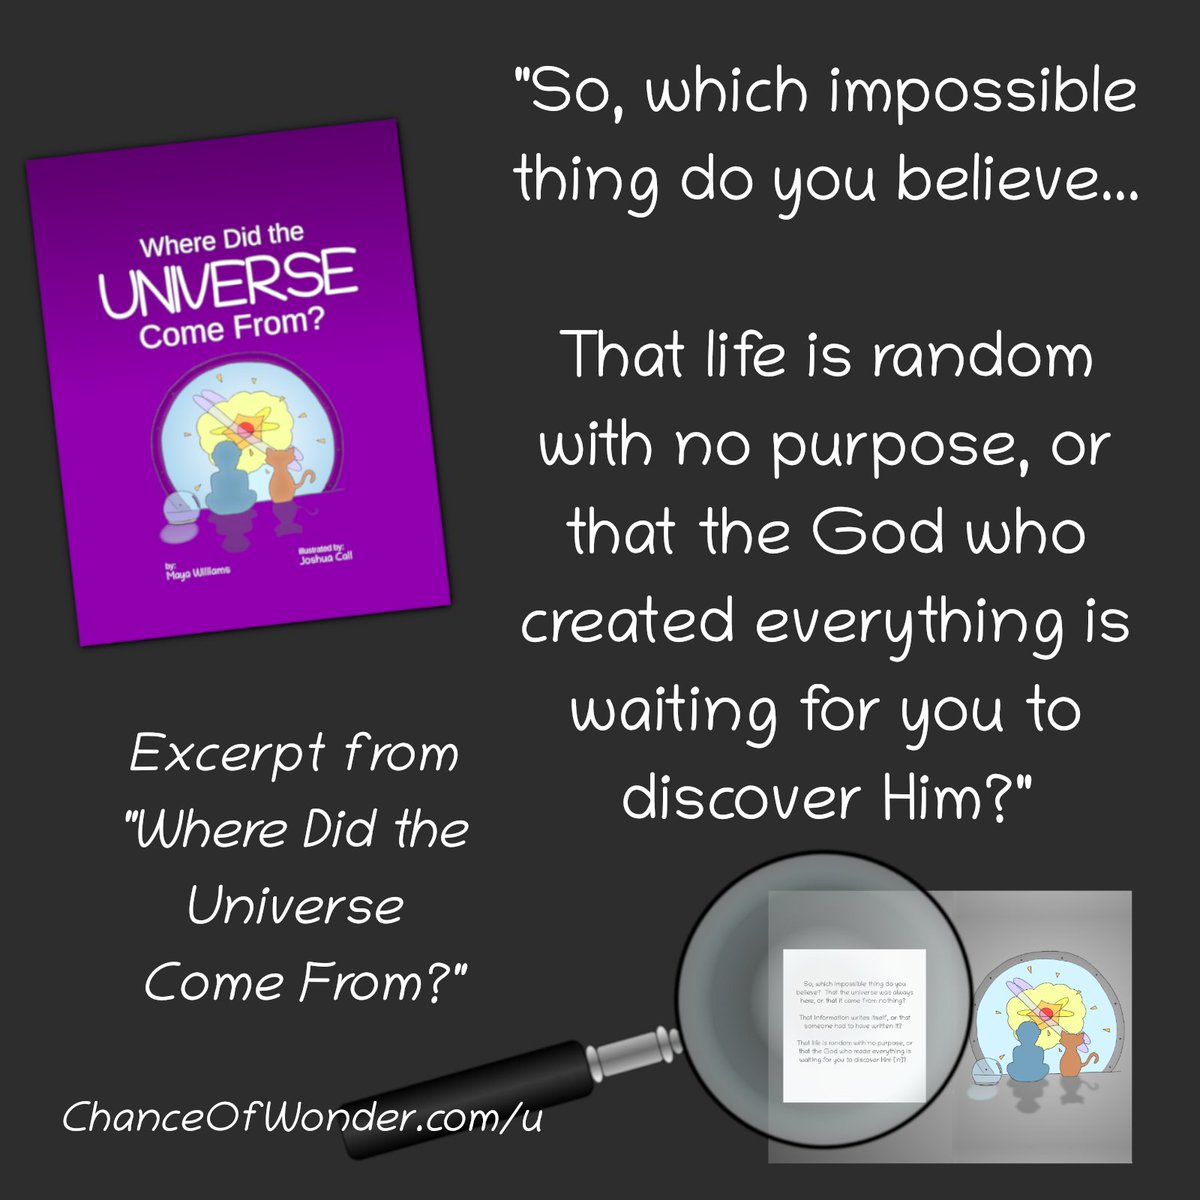 Excerpt from 'Where Did the Universe Come From?' 
ChanceOfWonder.com/u or find it on Amazon!

#ChristianKidsBooks #ApologeticsForKids #ChristianLiterature  #FaithfulReads #InspiringYouth #DefendingTheFaith #ChristianMinds  #ApologistKids #FaithfulYoungMinds